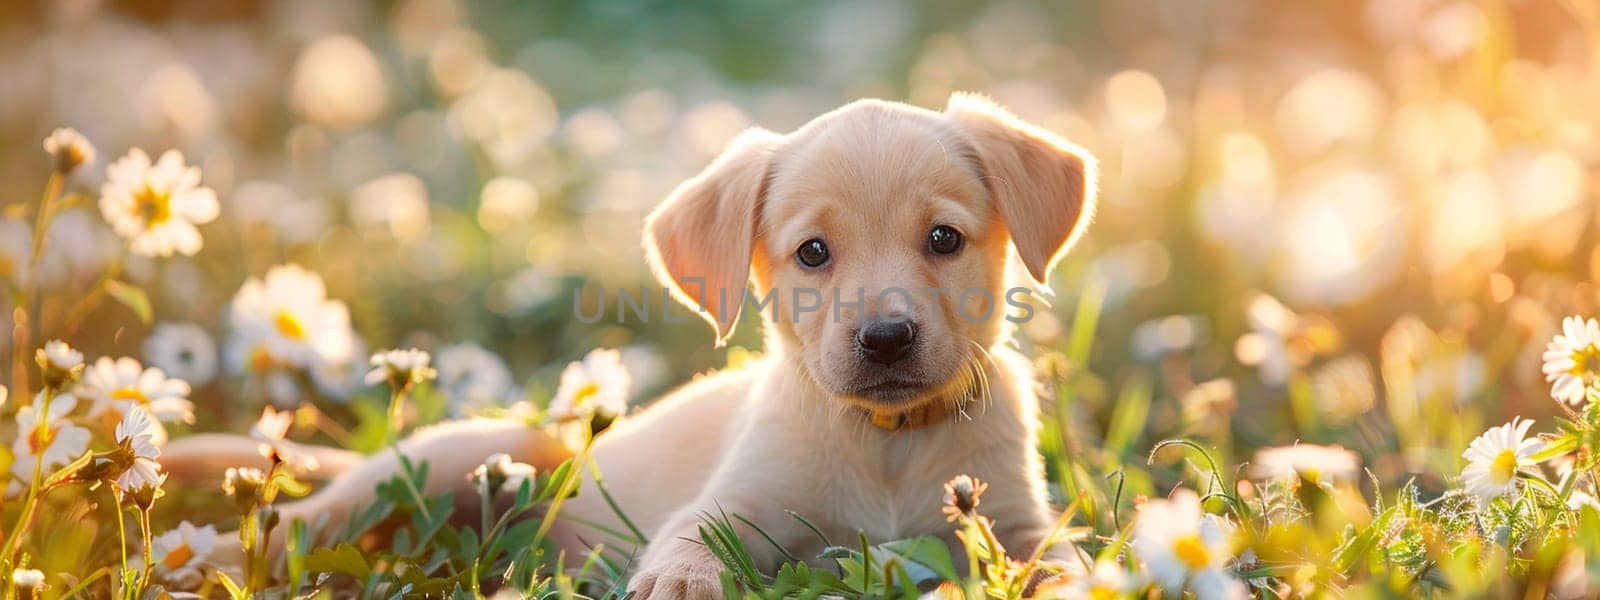 puppy on the lawn of flowers. selective focus. animal.